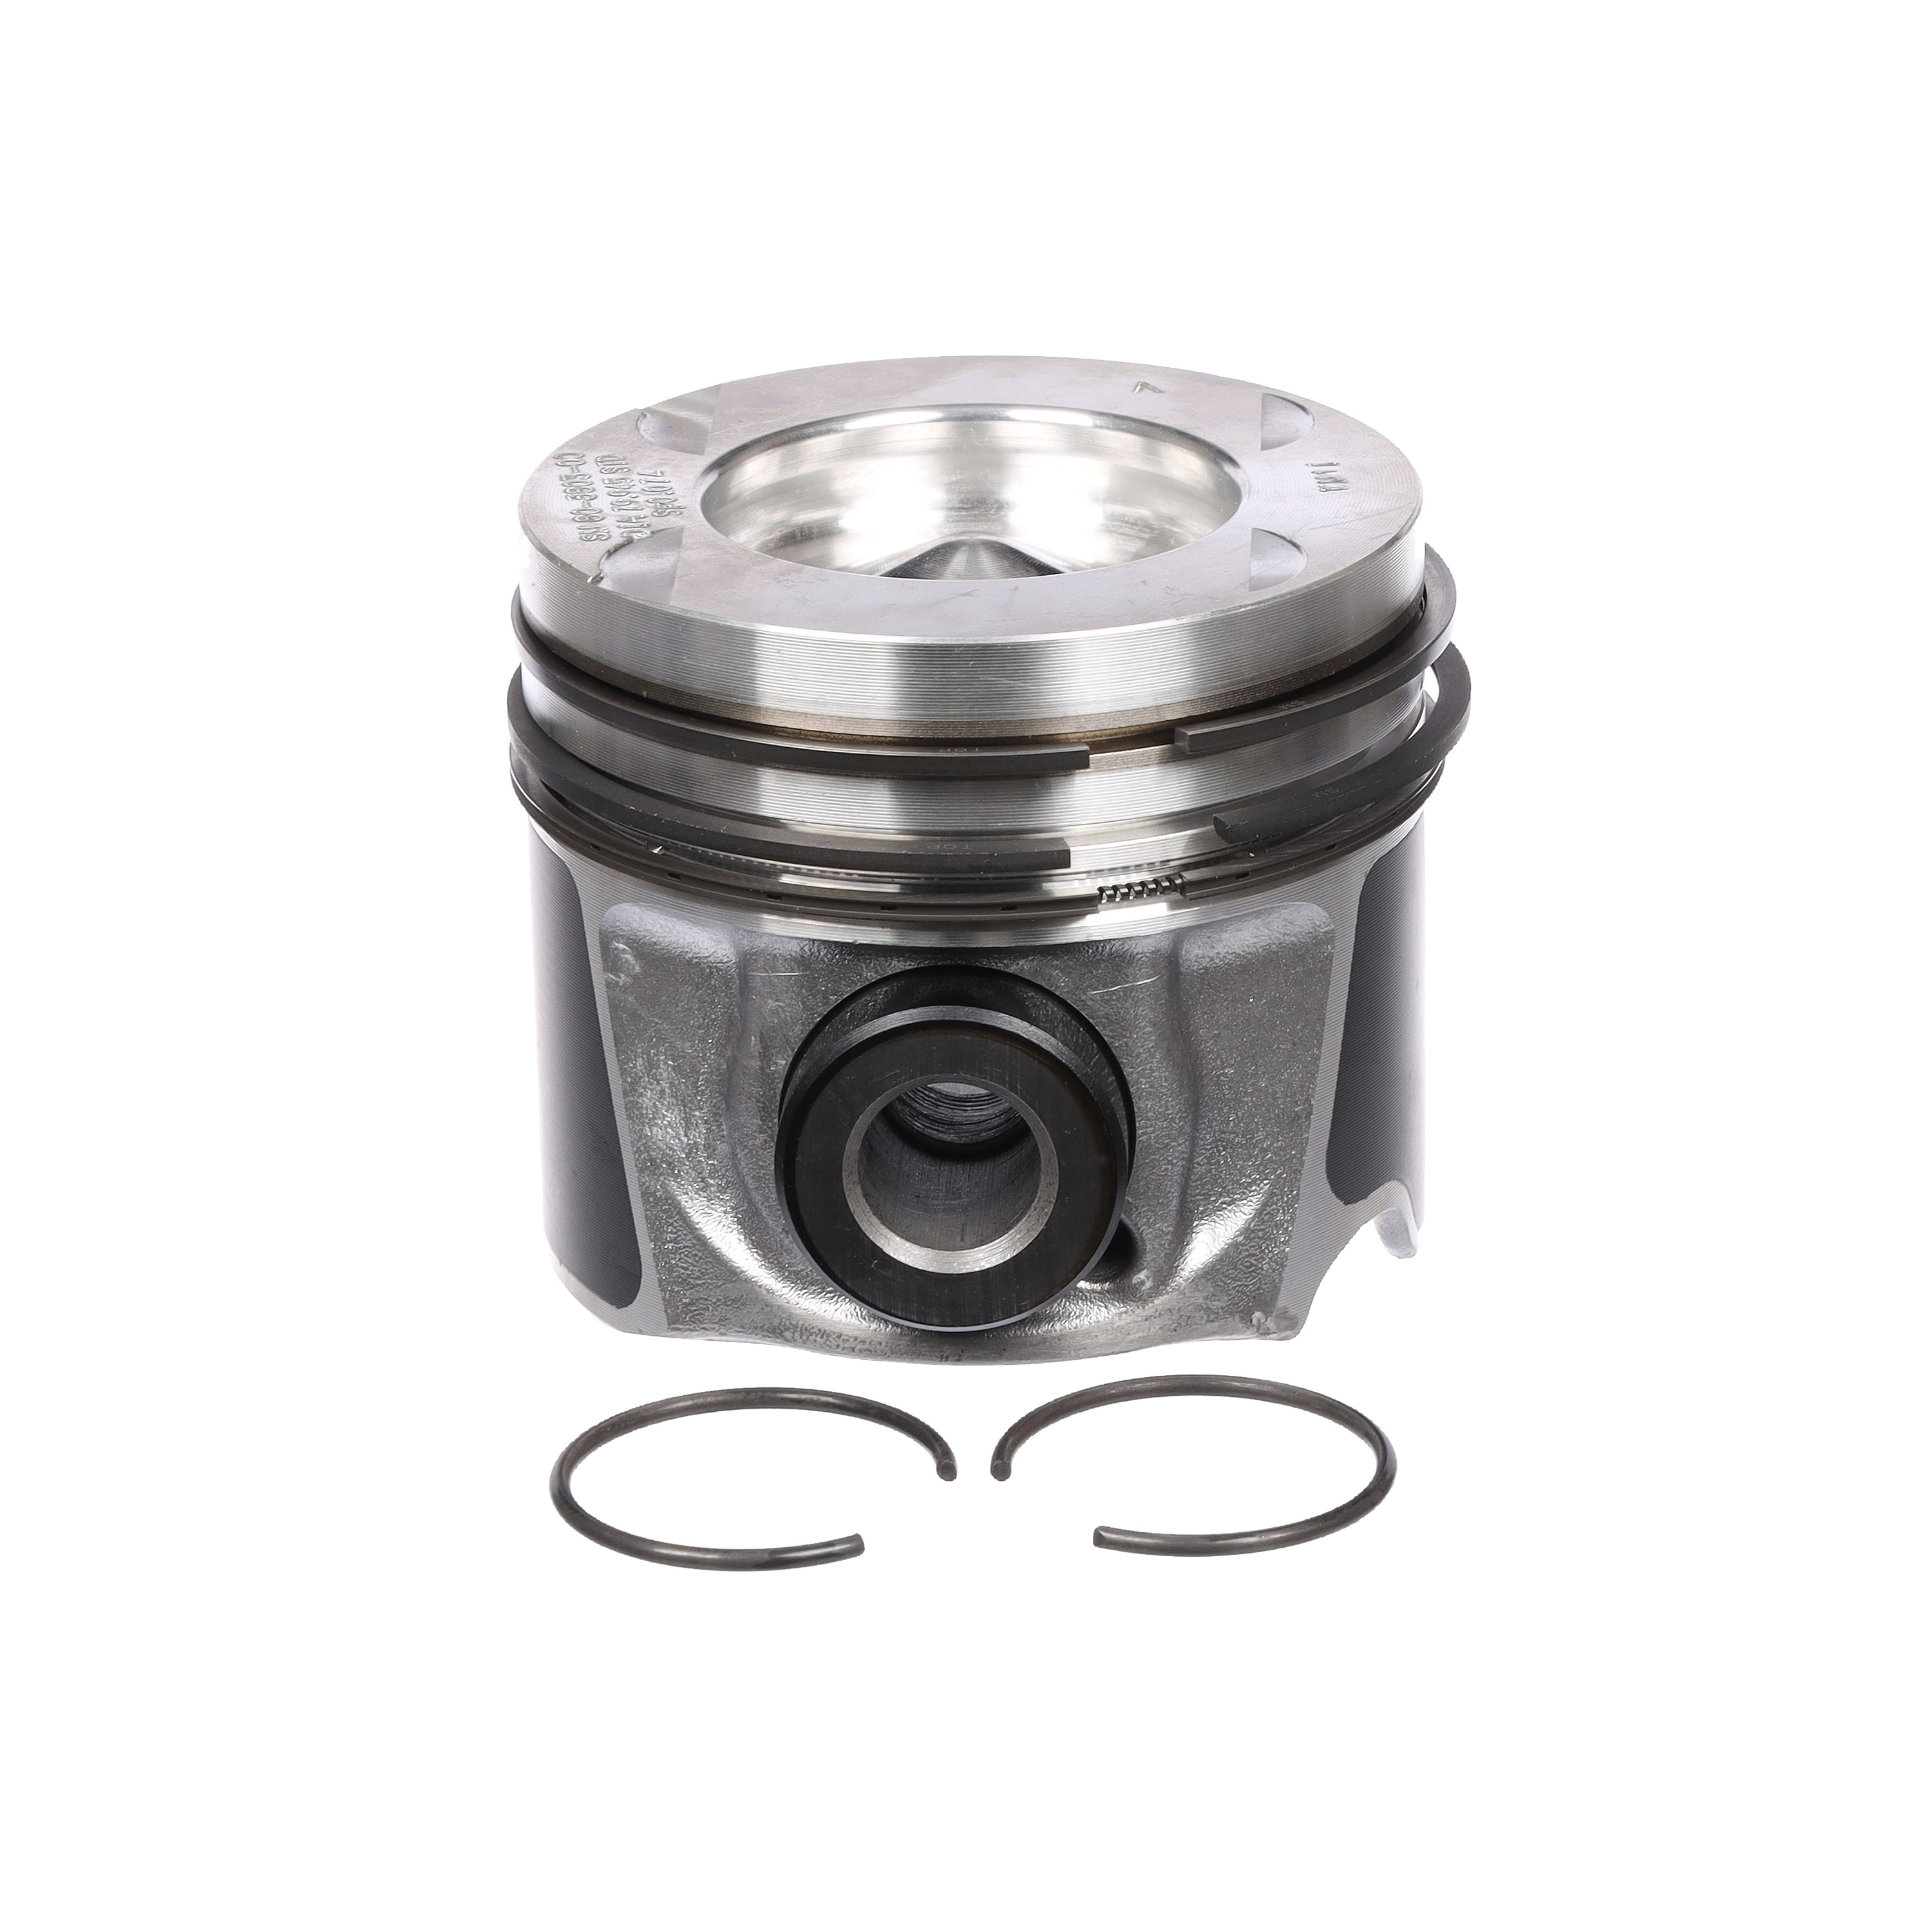 ET ENGINETEAM PM011150 Piston NISSAN experience and price